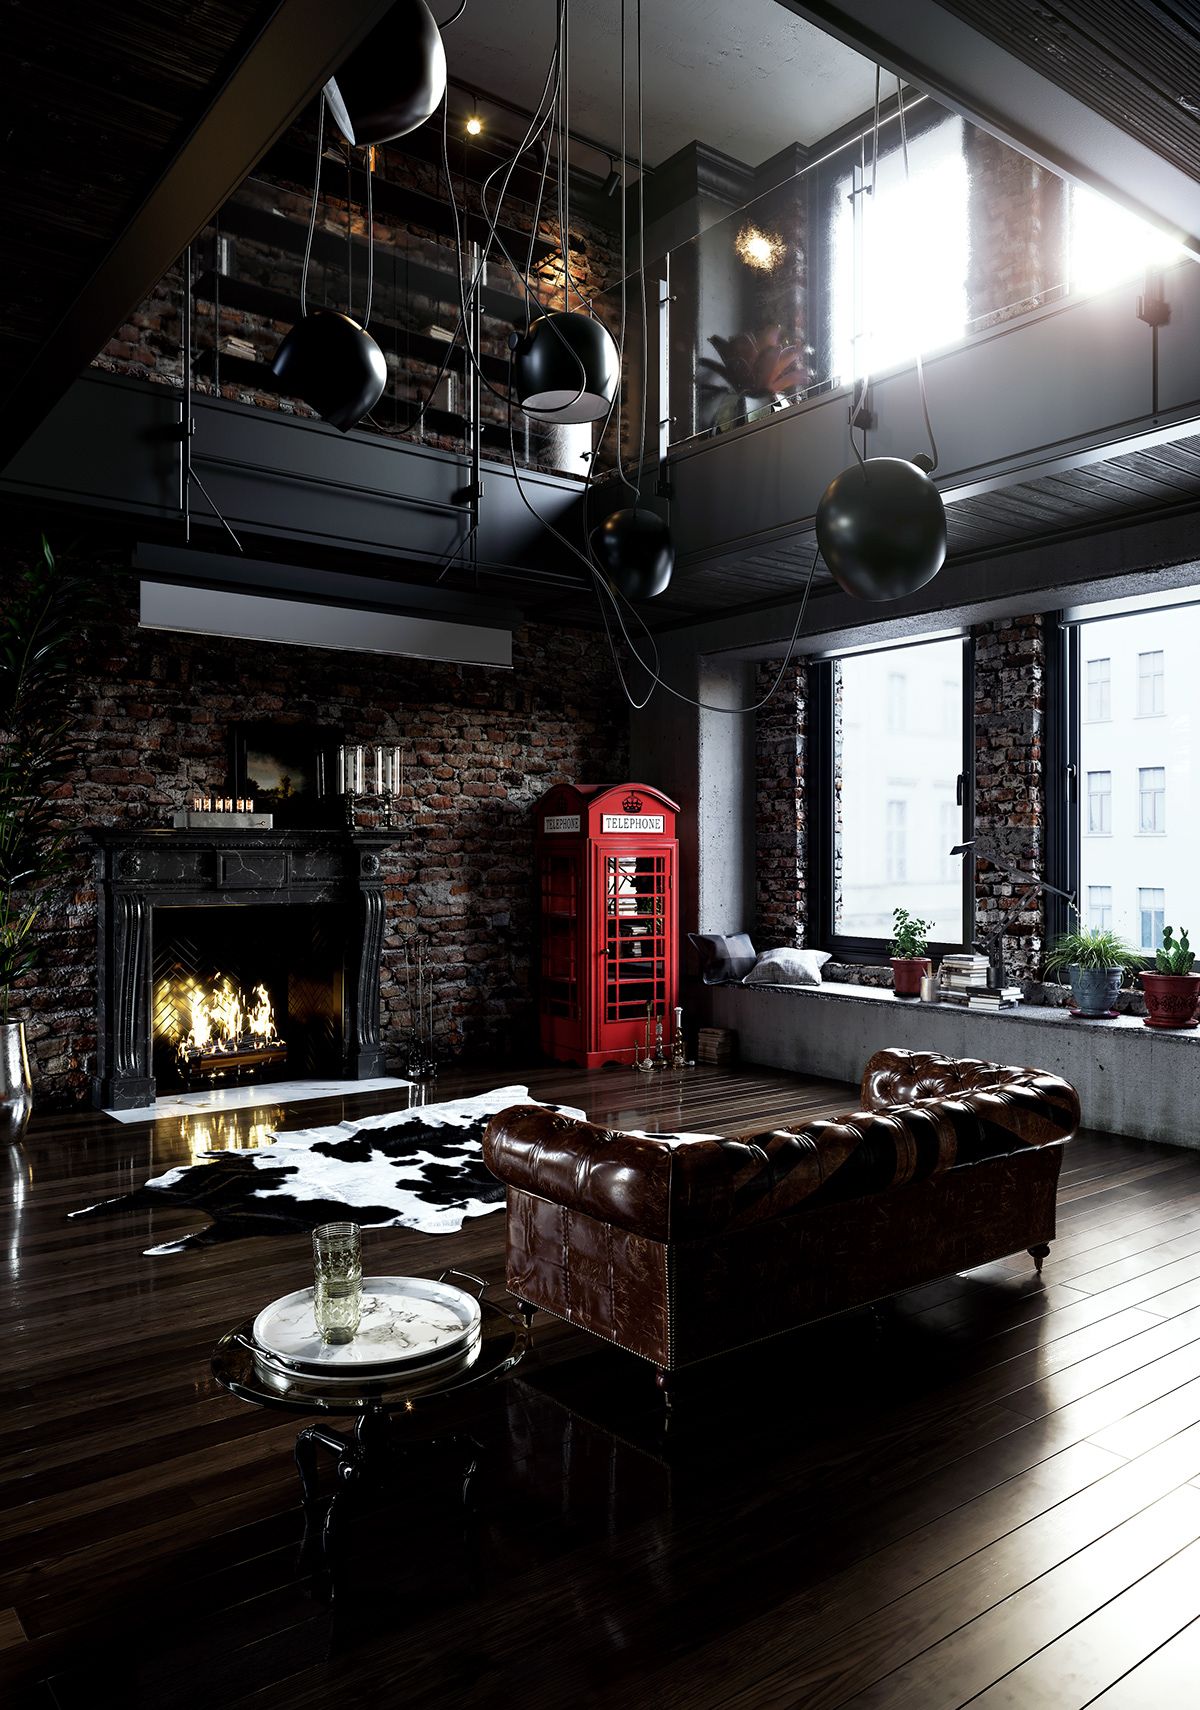 An Expansive Room With An Industrial Loft Design